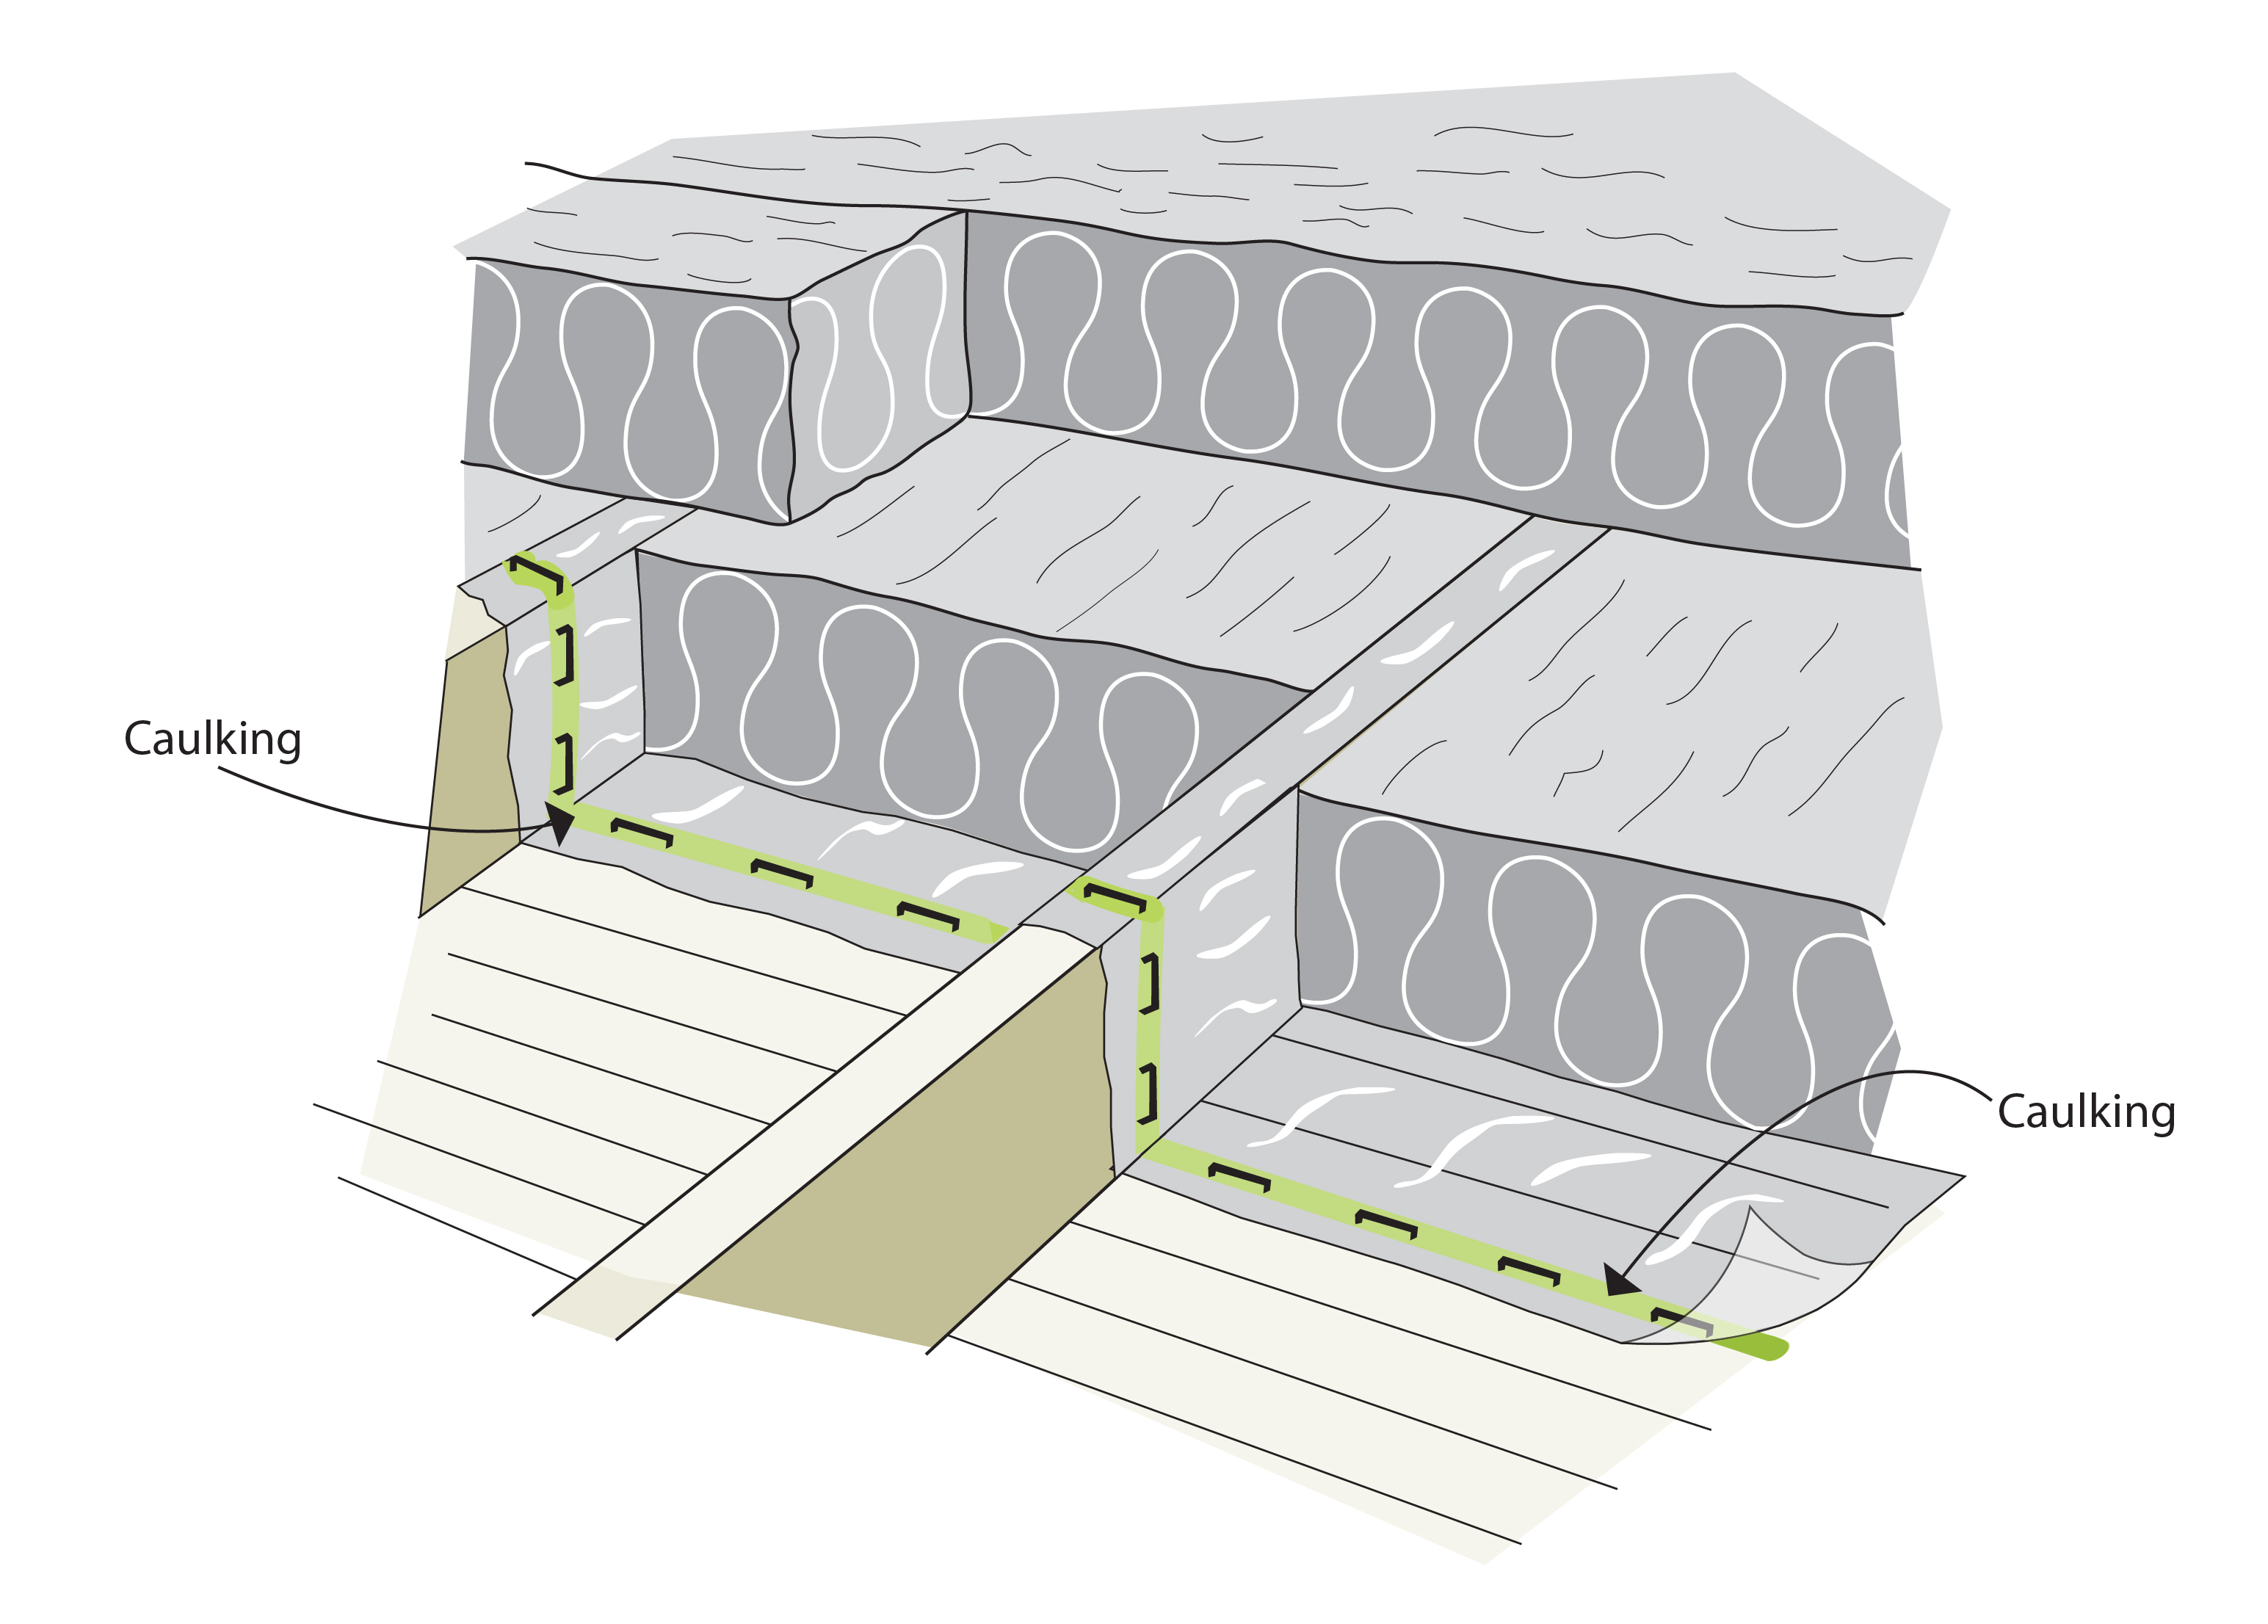 The top layer of insulation runs perpendicular to the bottom layer